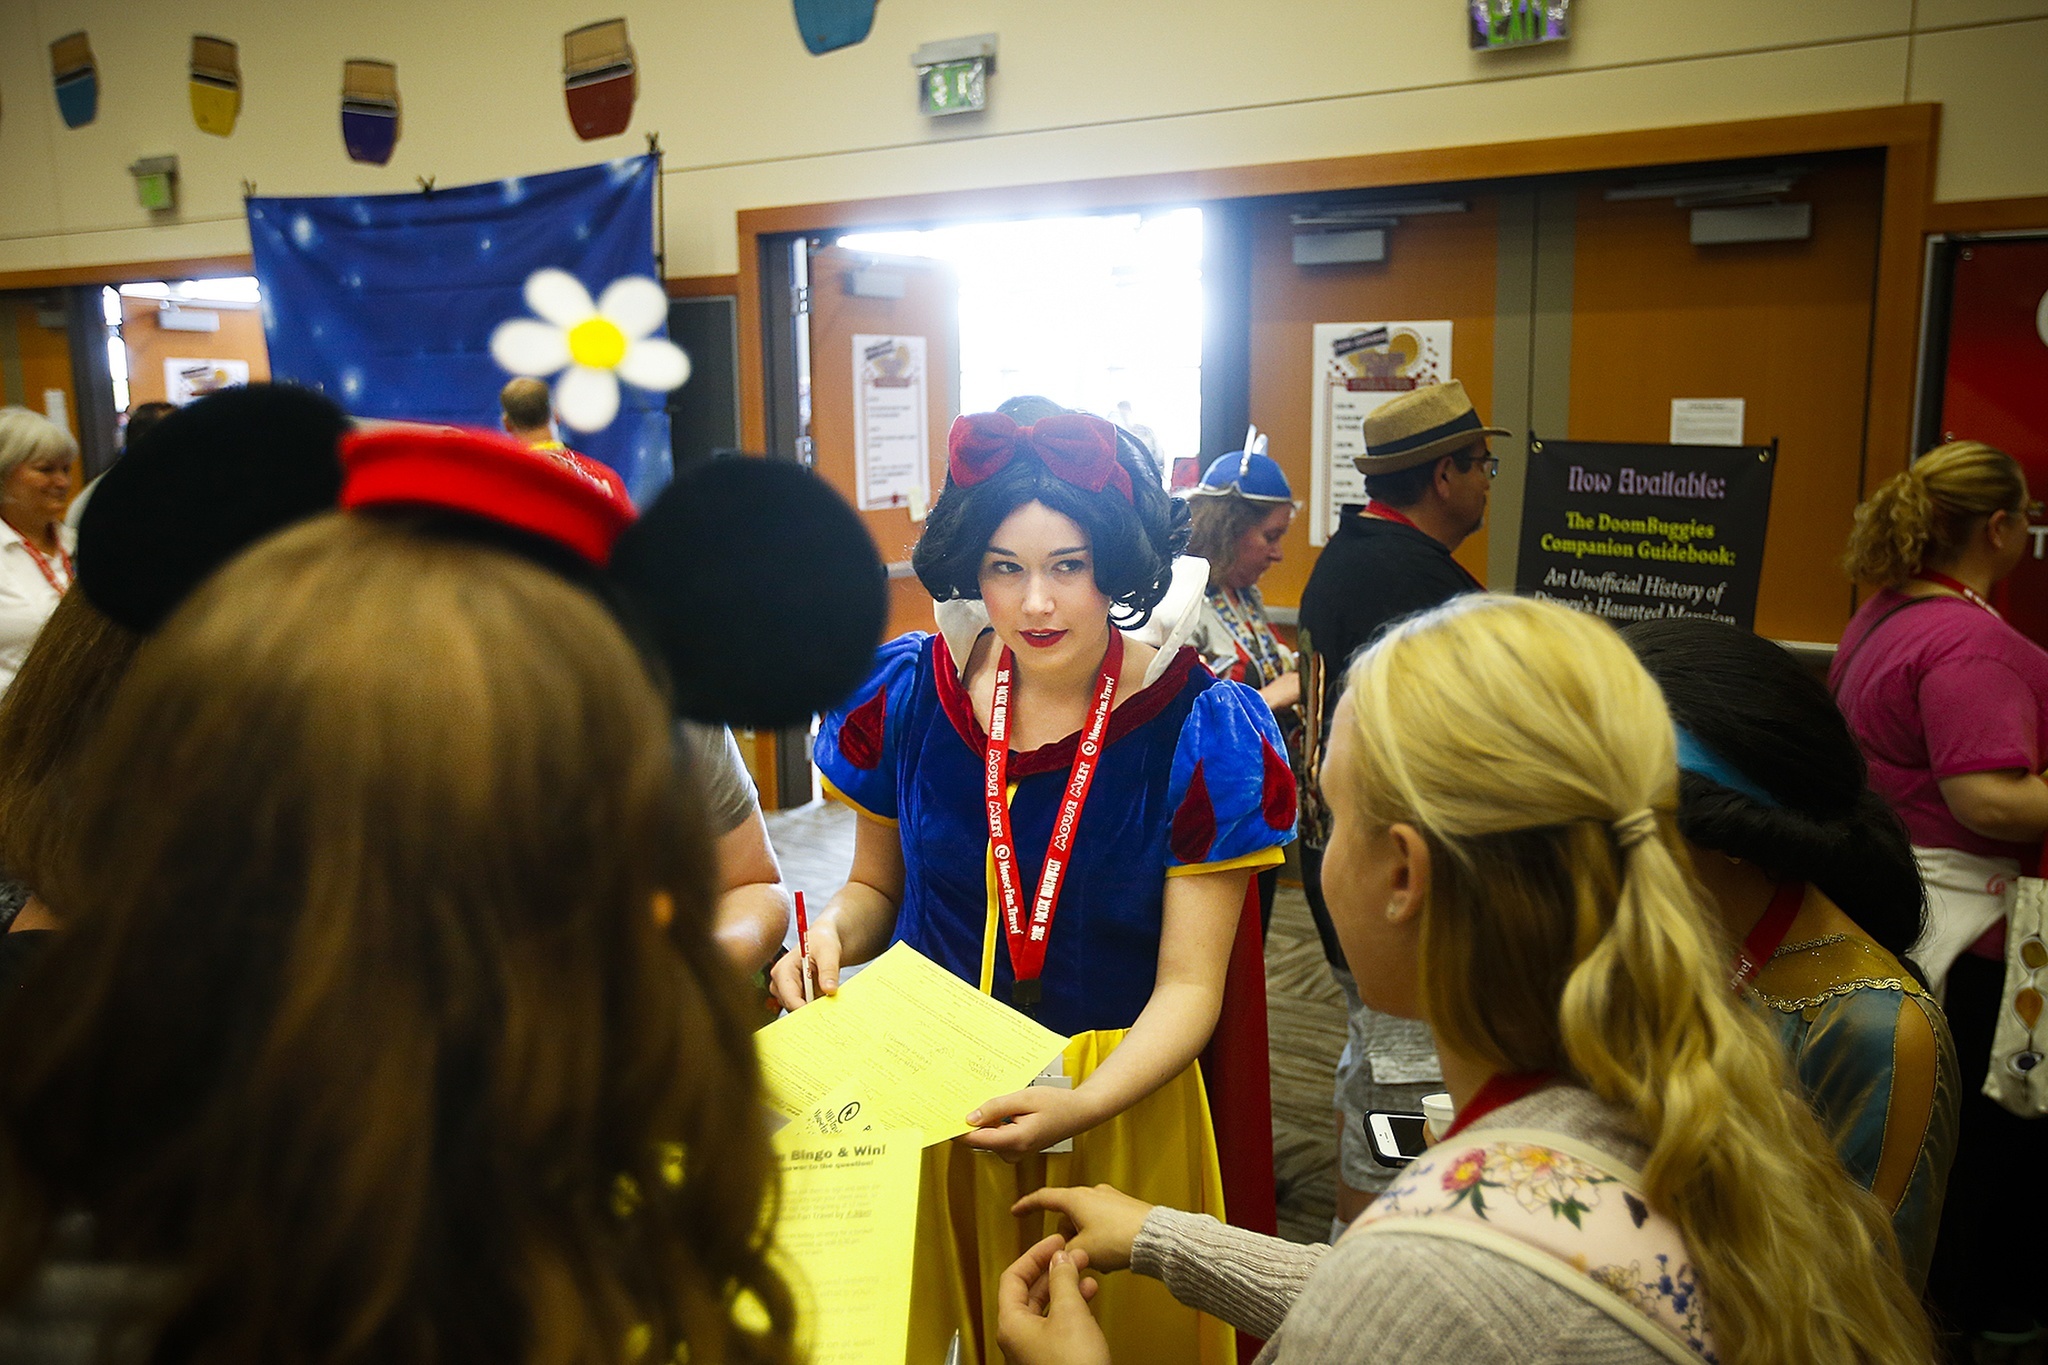 Dressed as Snow White, Eliana O’Neill (center), of Portland, chats with other Disney fans at the eighth annual Pacific Northwest Mouse Meet at the Lynnwood Convention Center on Saturday, July 9, 2016. (Ian Terry / The Herald)